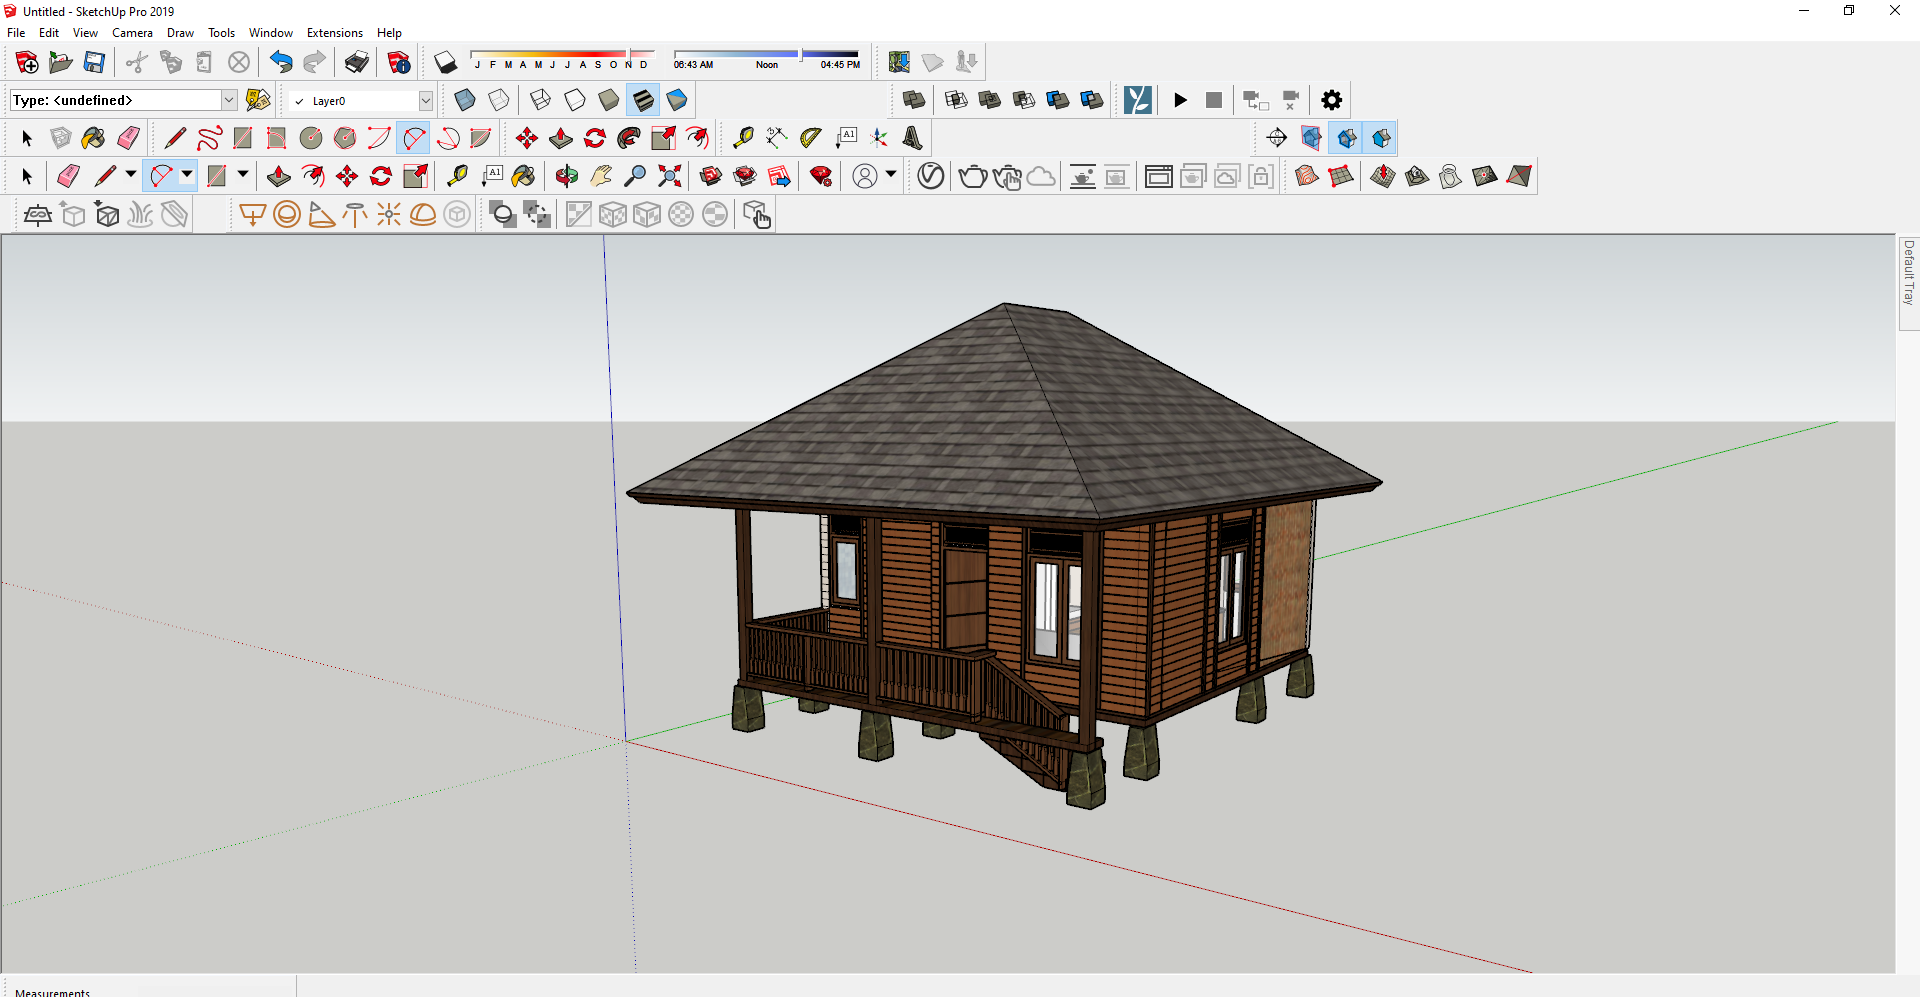 Untitled - SketchUp Pro 2019 5_20_2021 2_02_09 AM.png